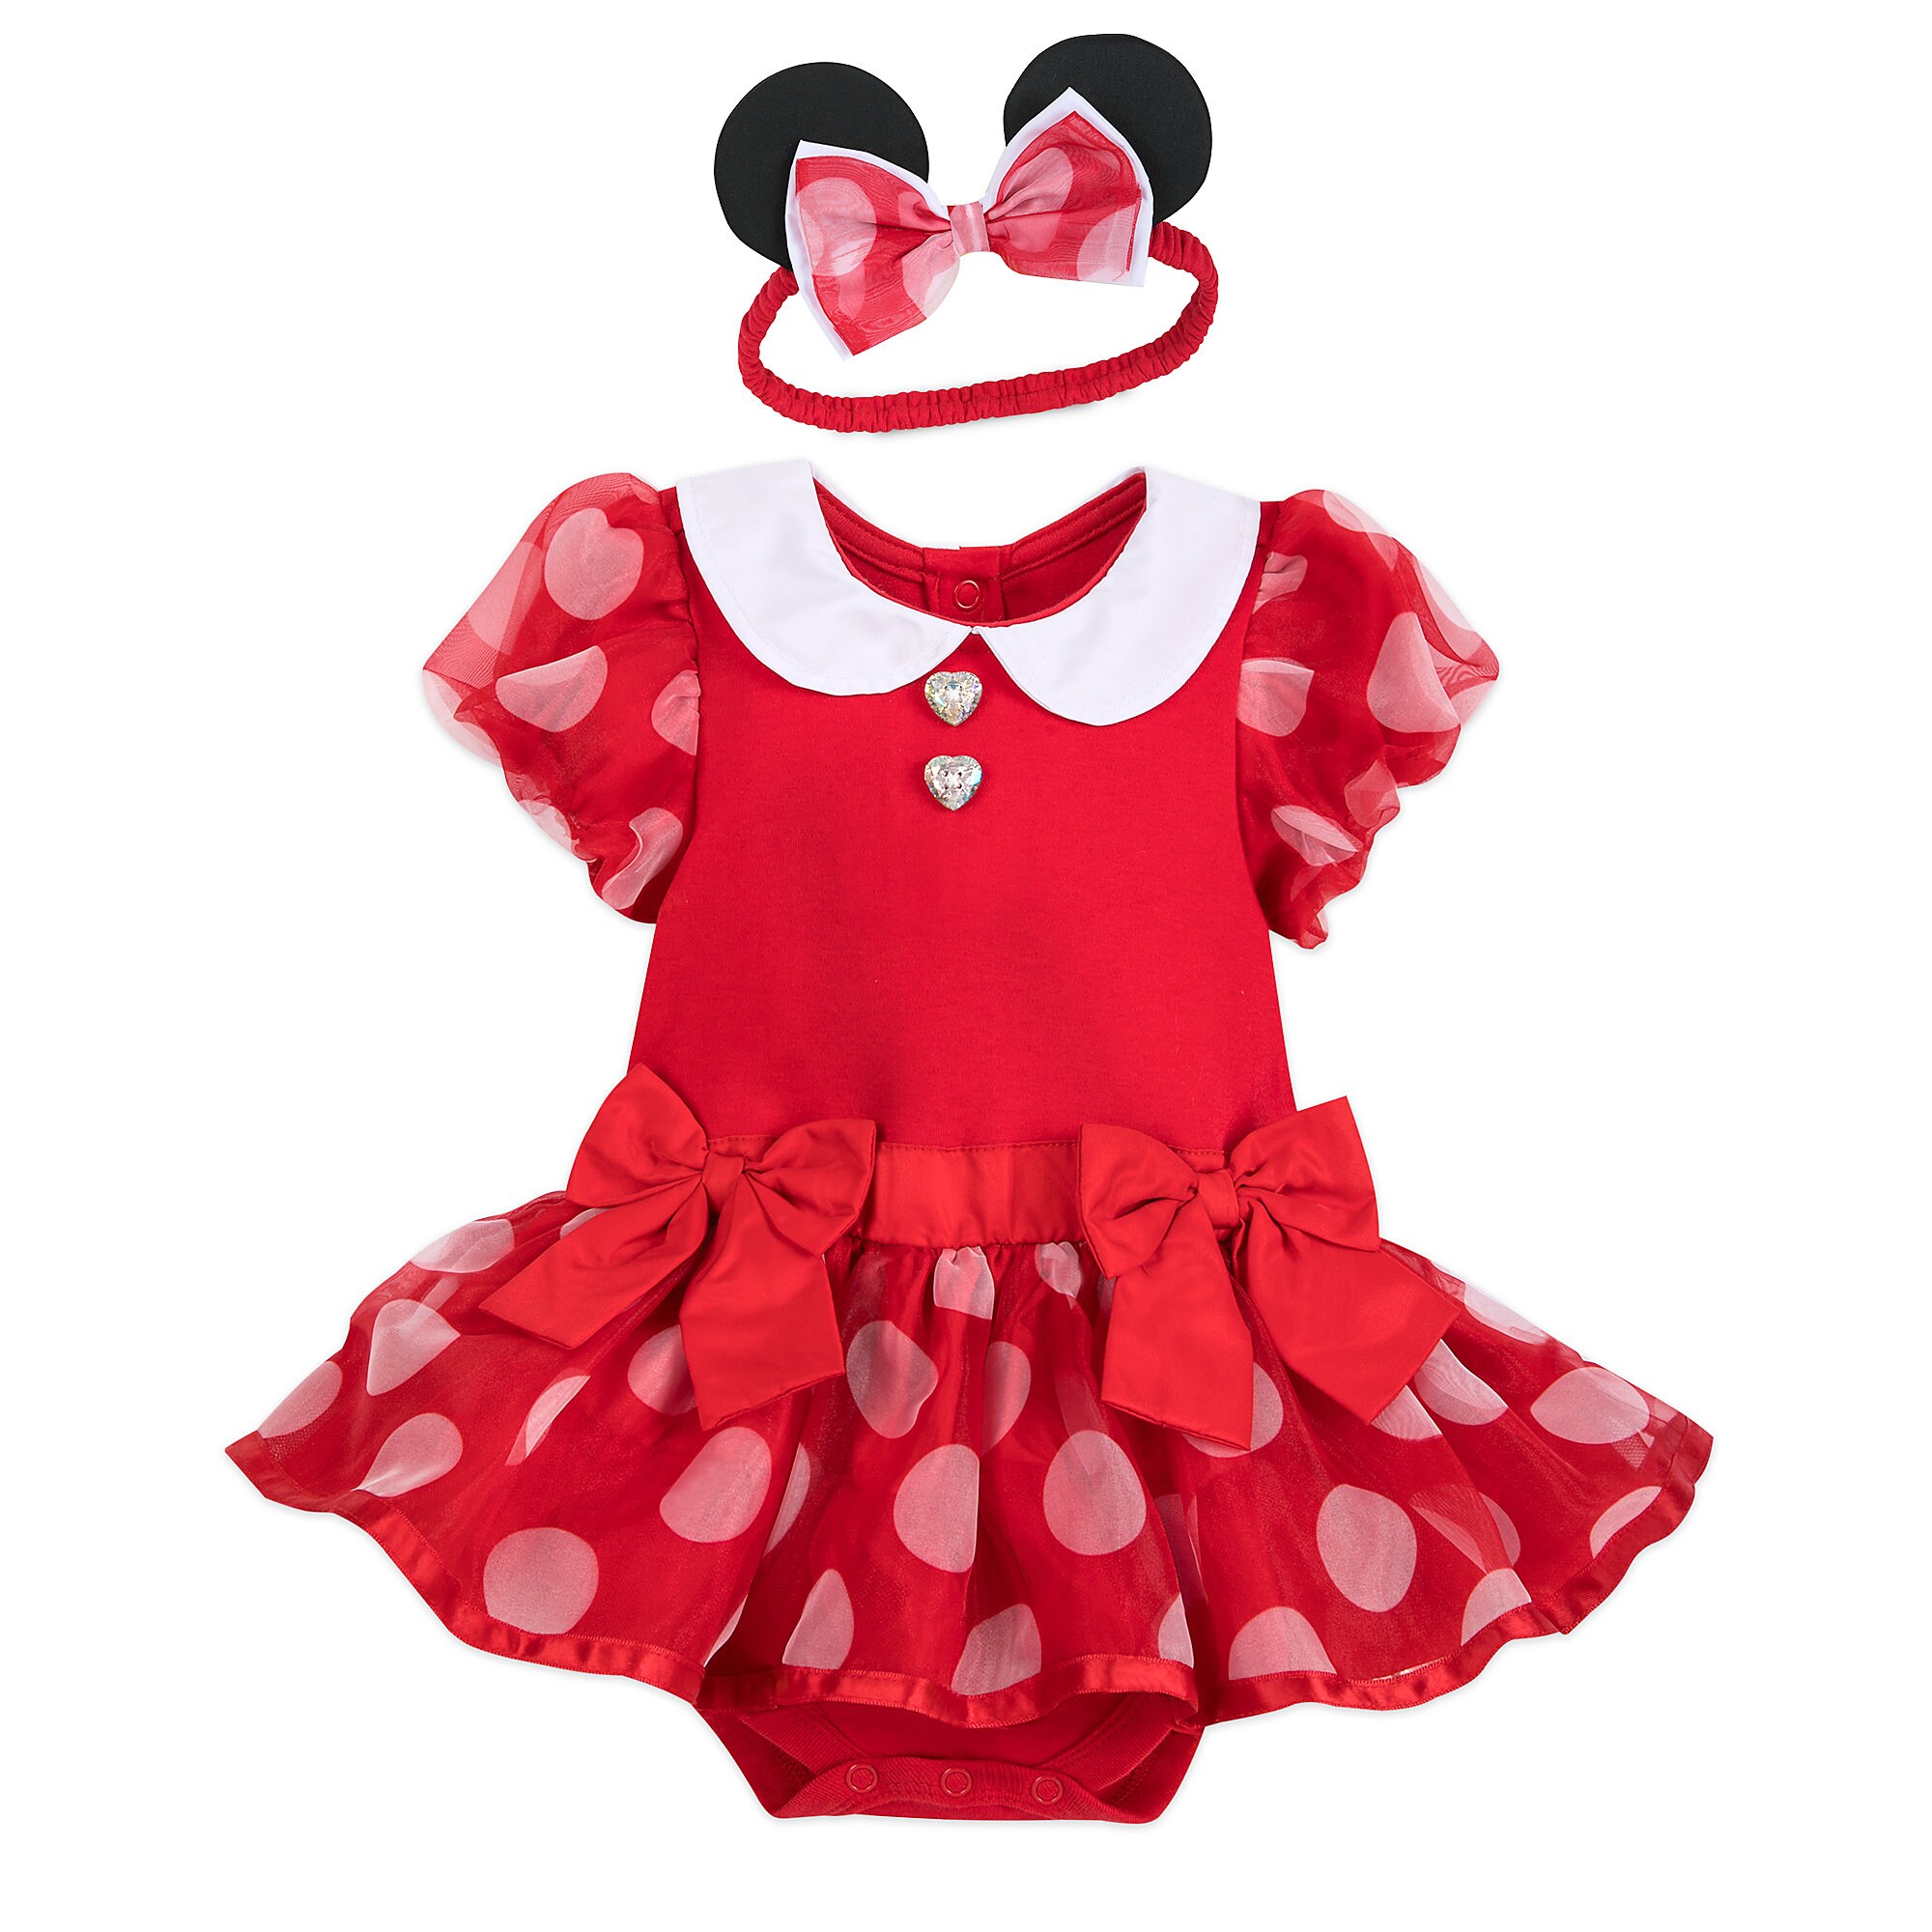 Minnie Mouse Costume Bodysuit for Baby - Red now available – Dis ...